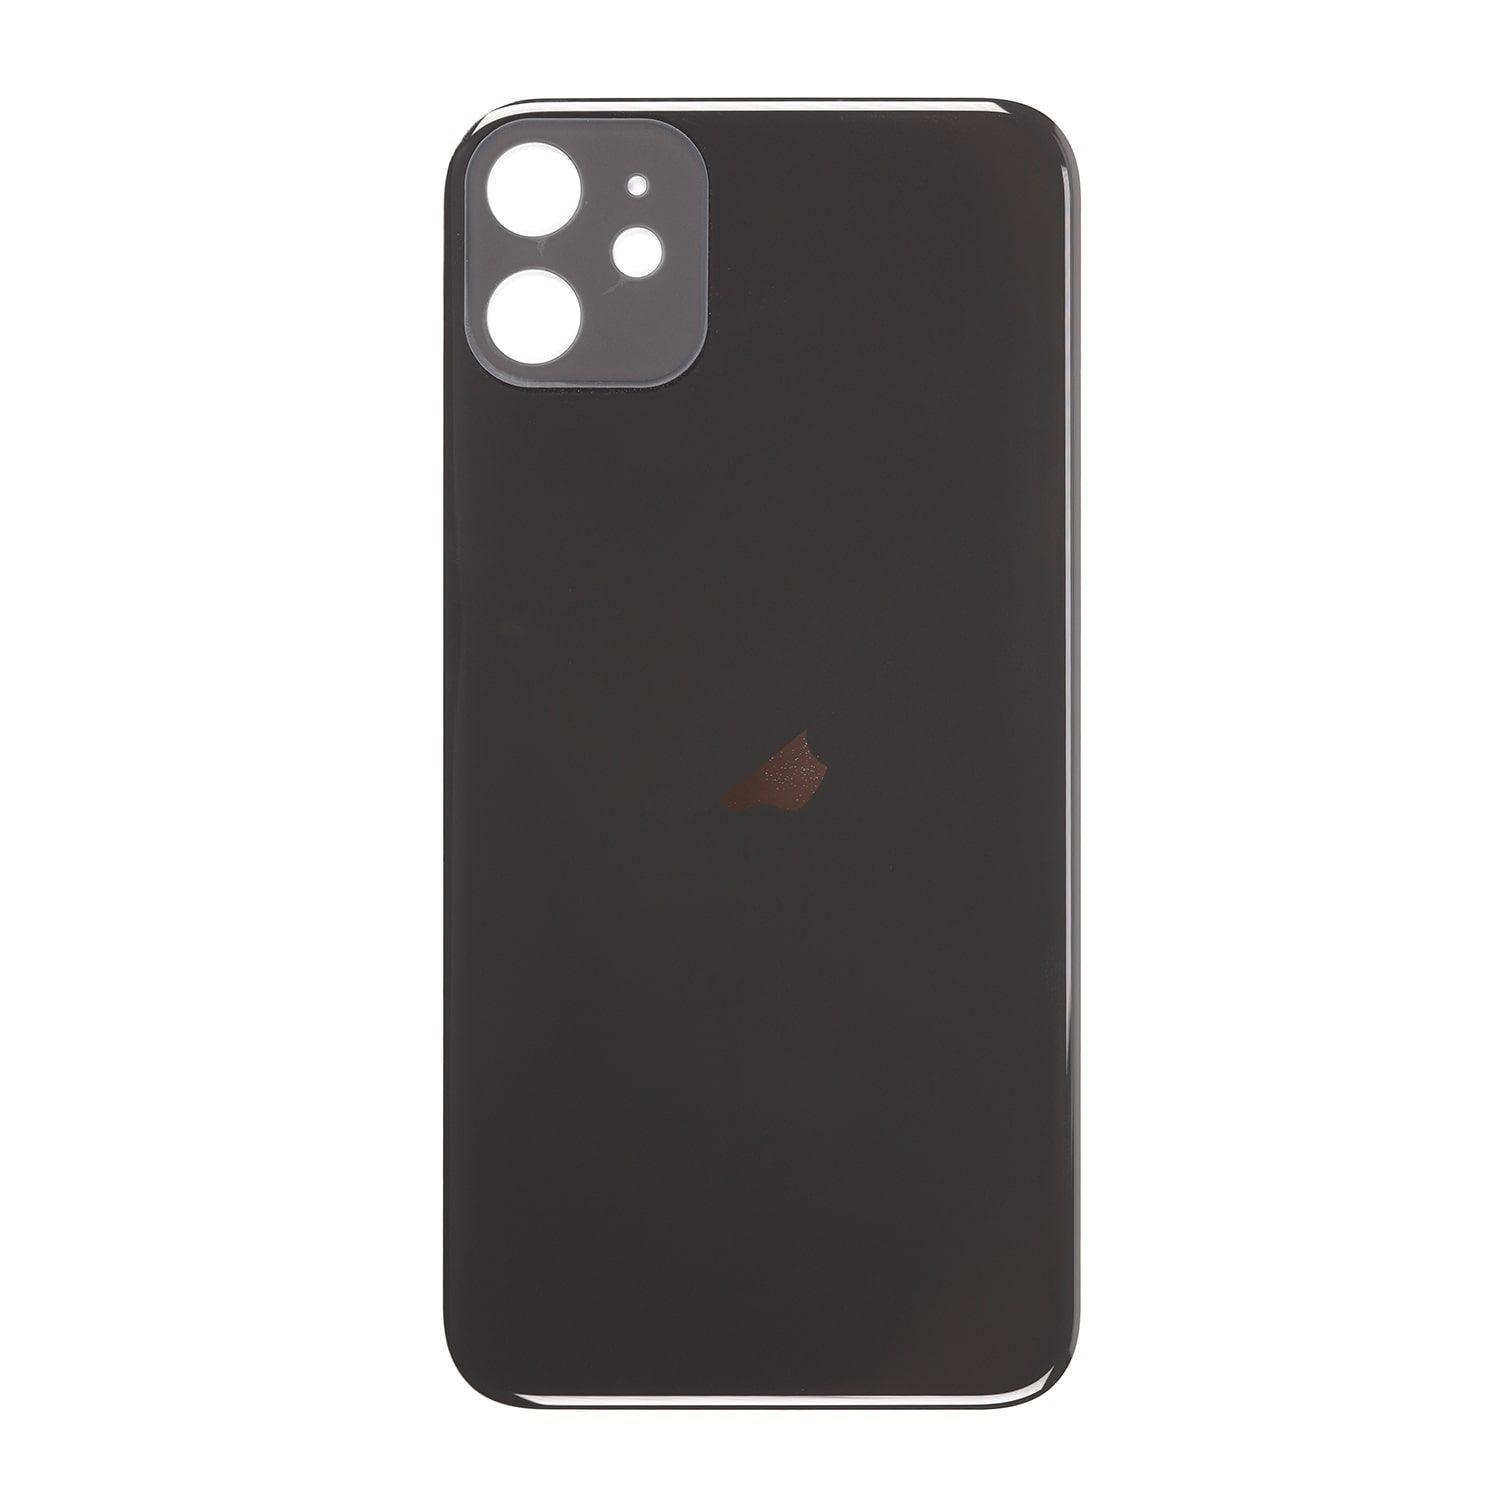 Iphone 11 black flip without camera glass